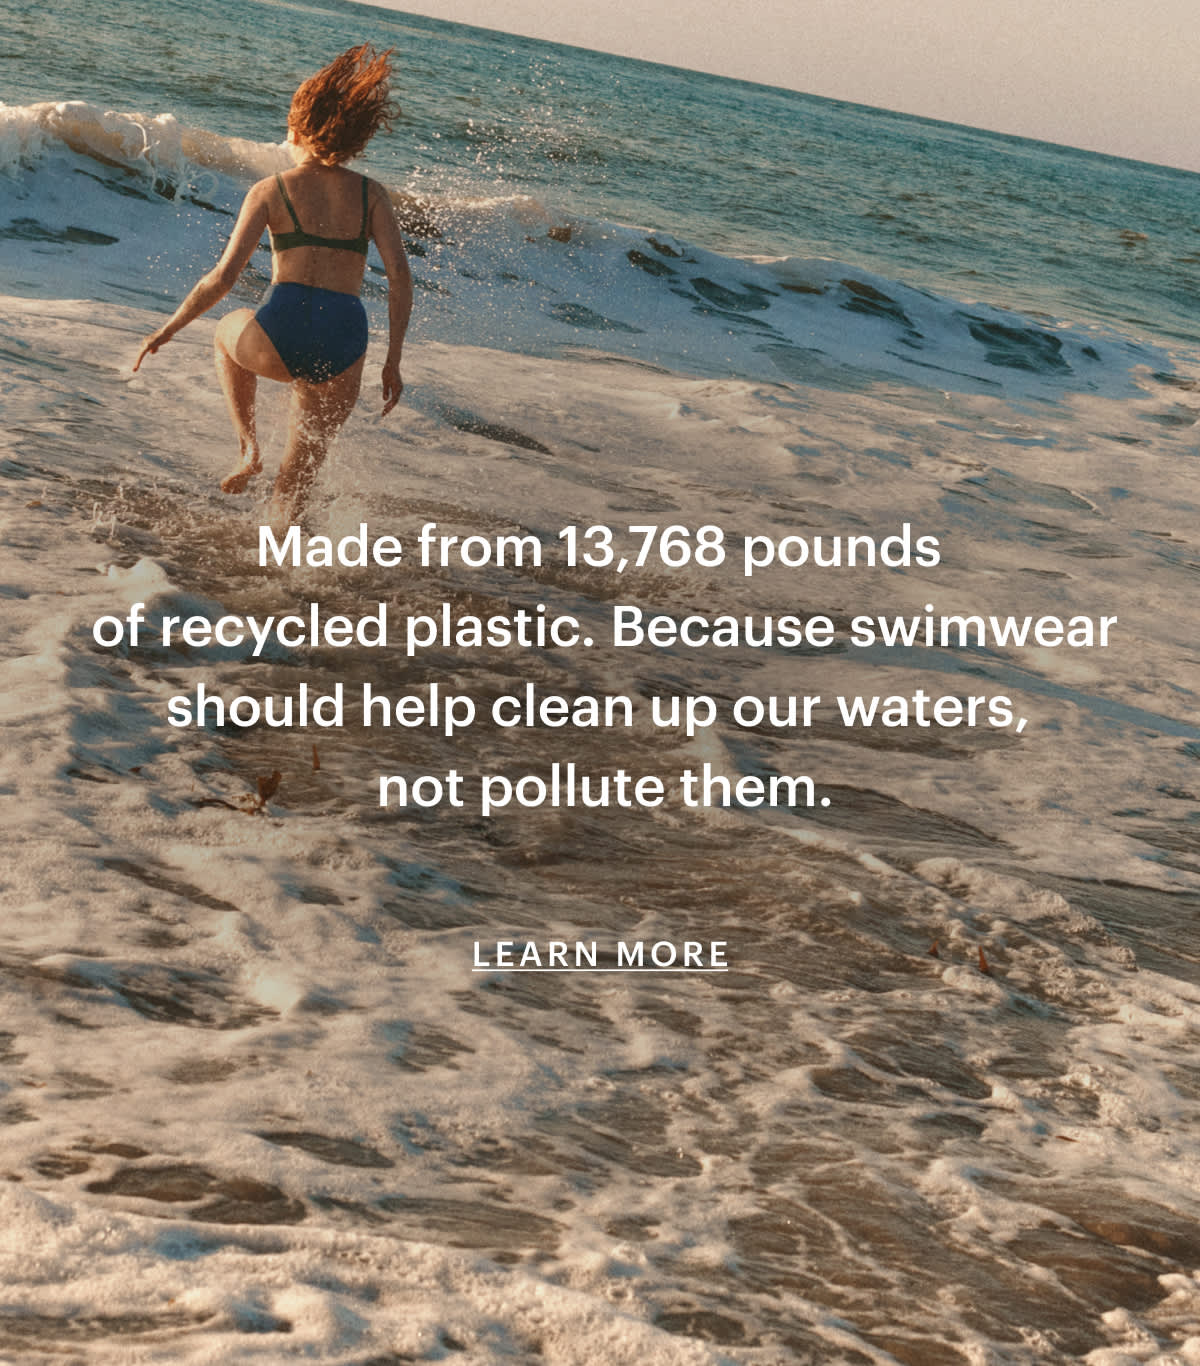 Made from 13,768 pounds of recycled plastic. Because swimwear should help clean up our waters, not pollute them.